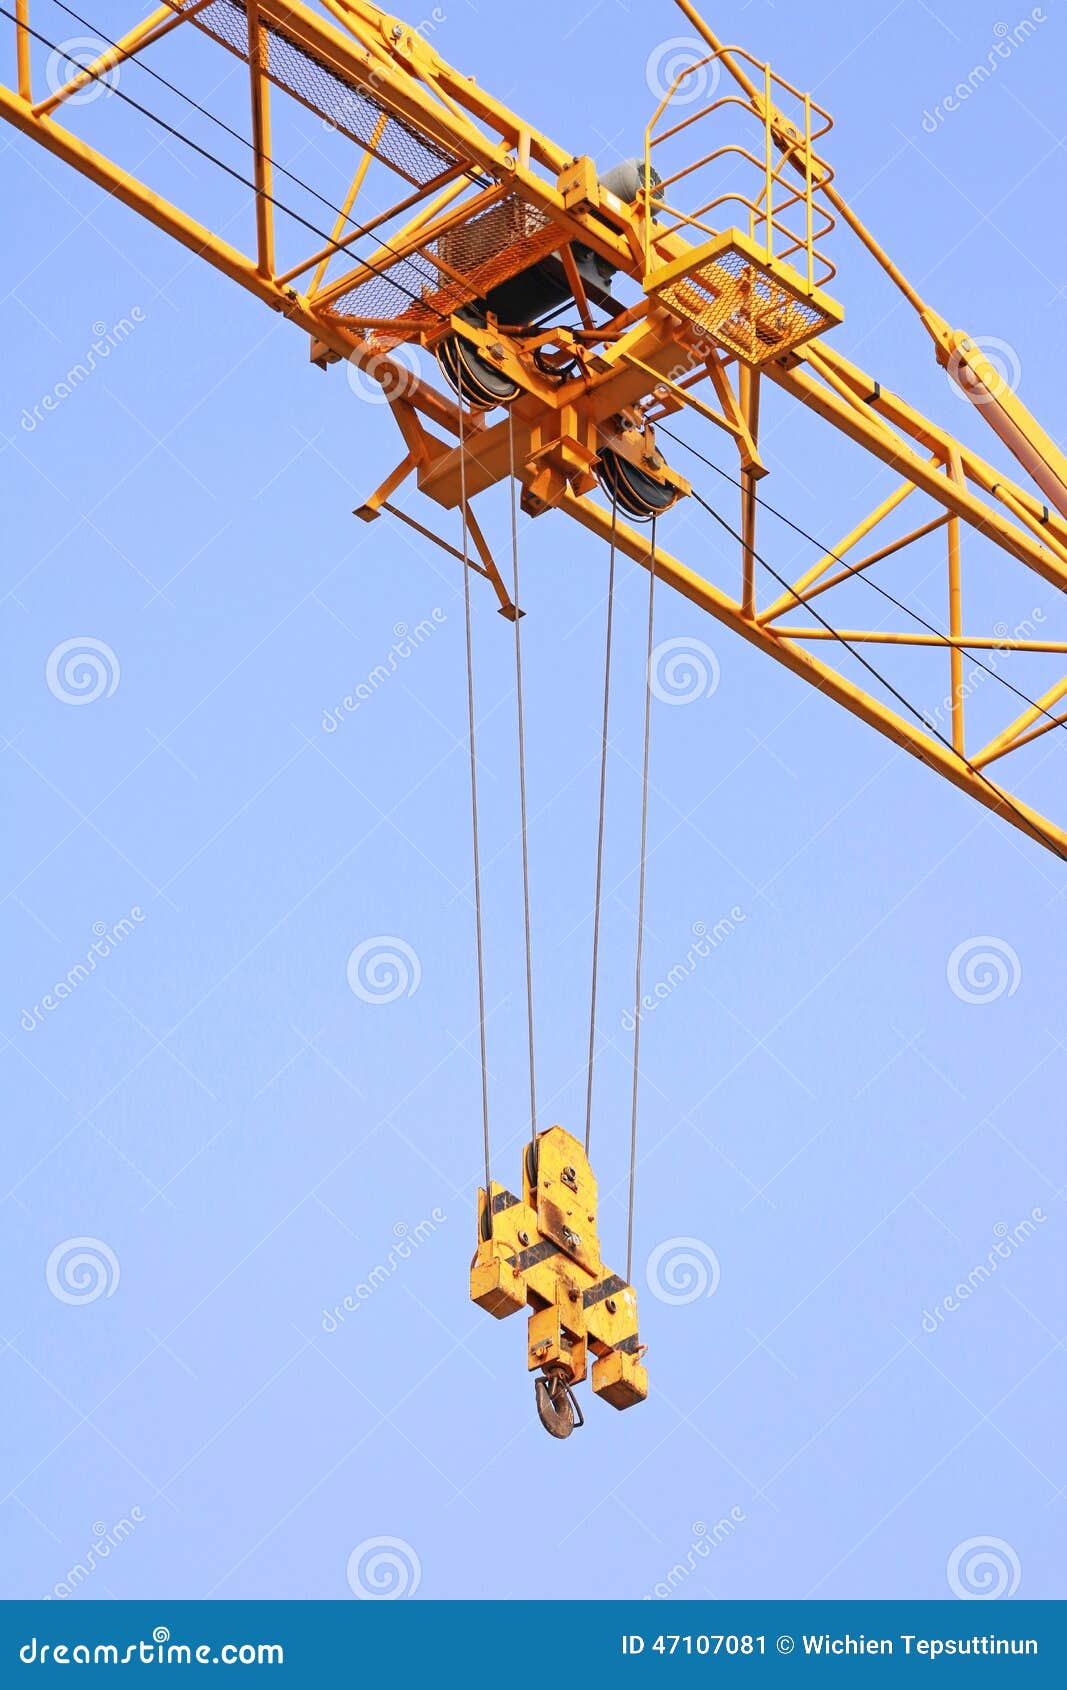 Hoist Trolley Mechanism of Tower Crane Stock Image - Image of parts ...